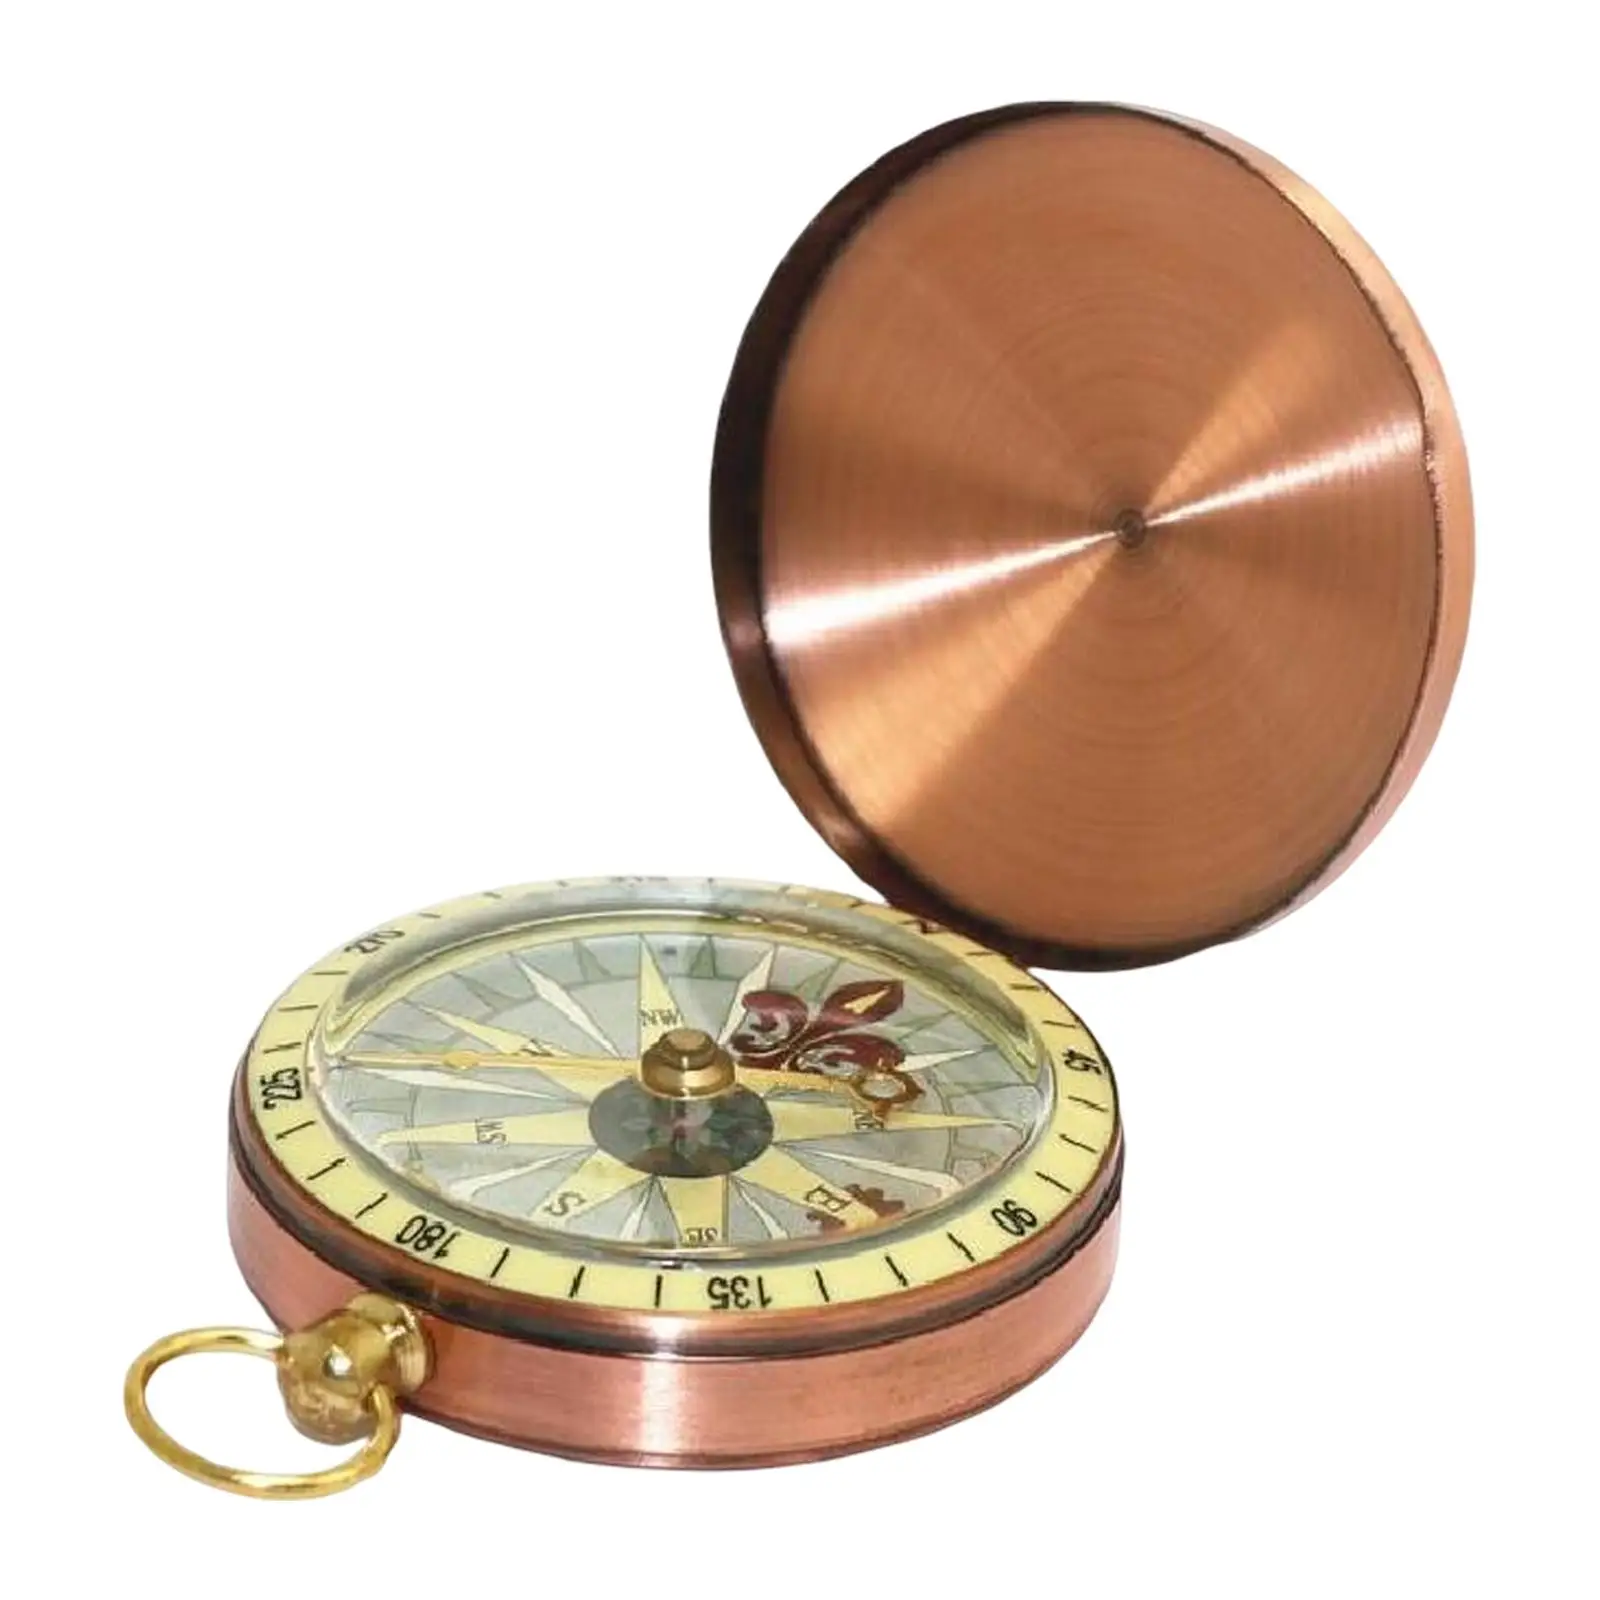 Classic Pocket Compass Vintage Style Handheld Accurate for Outdoor Hiking